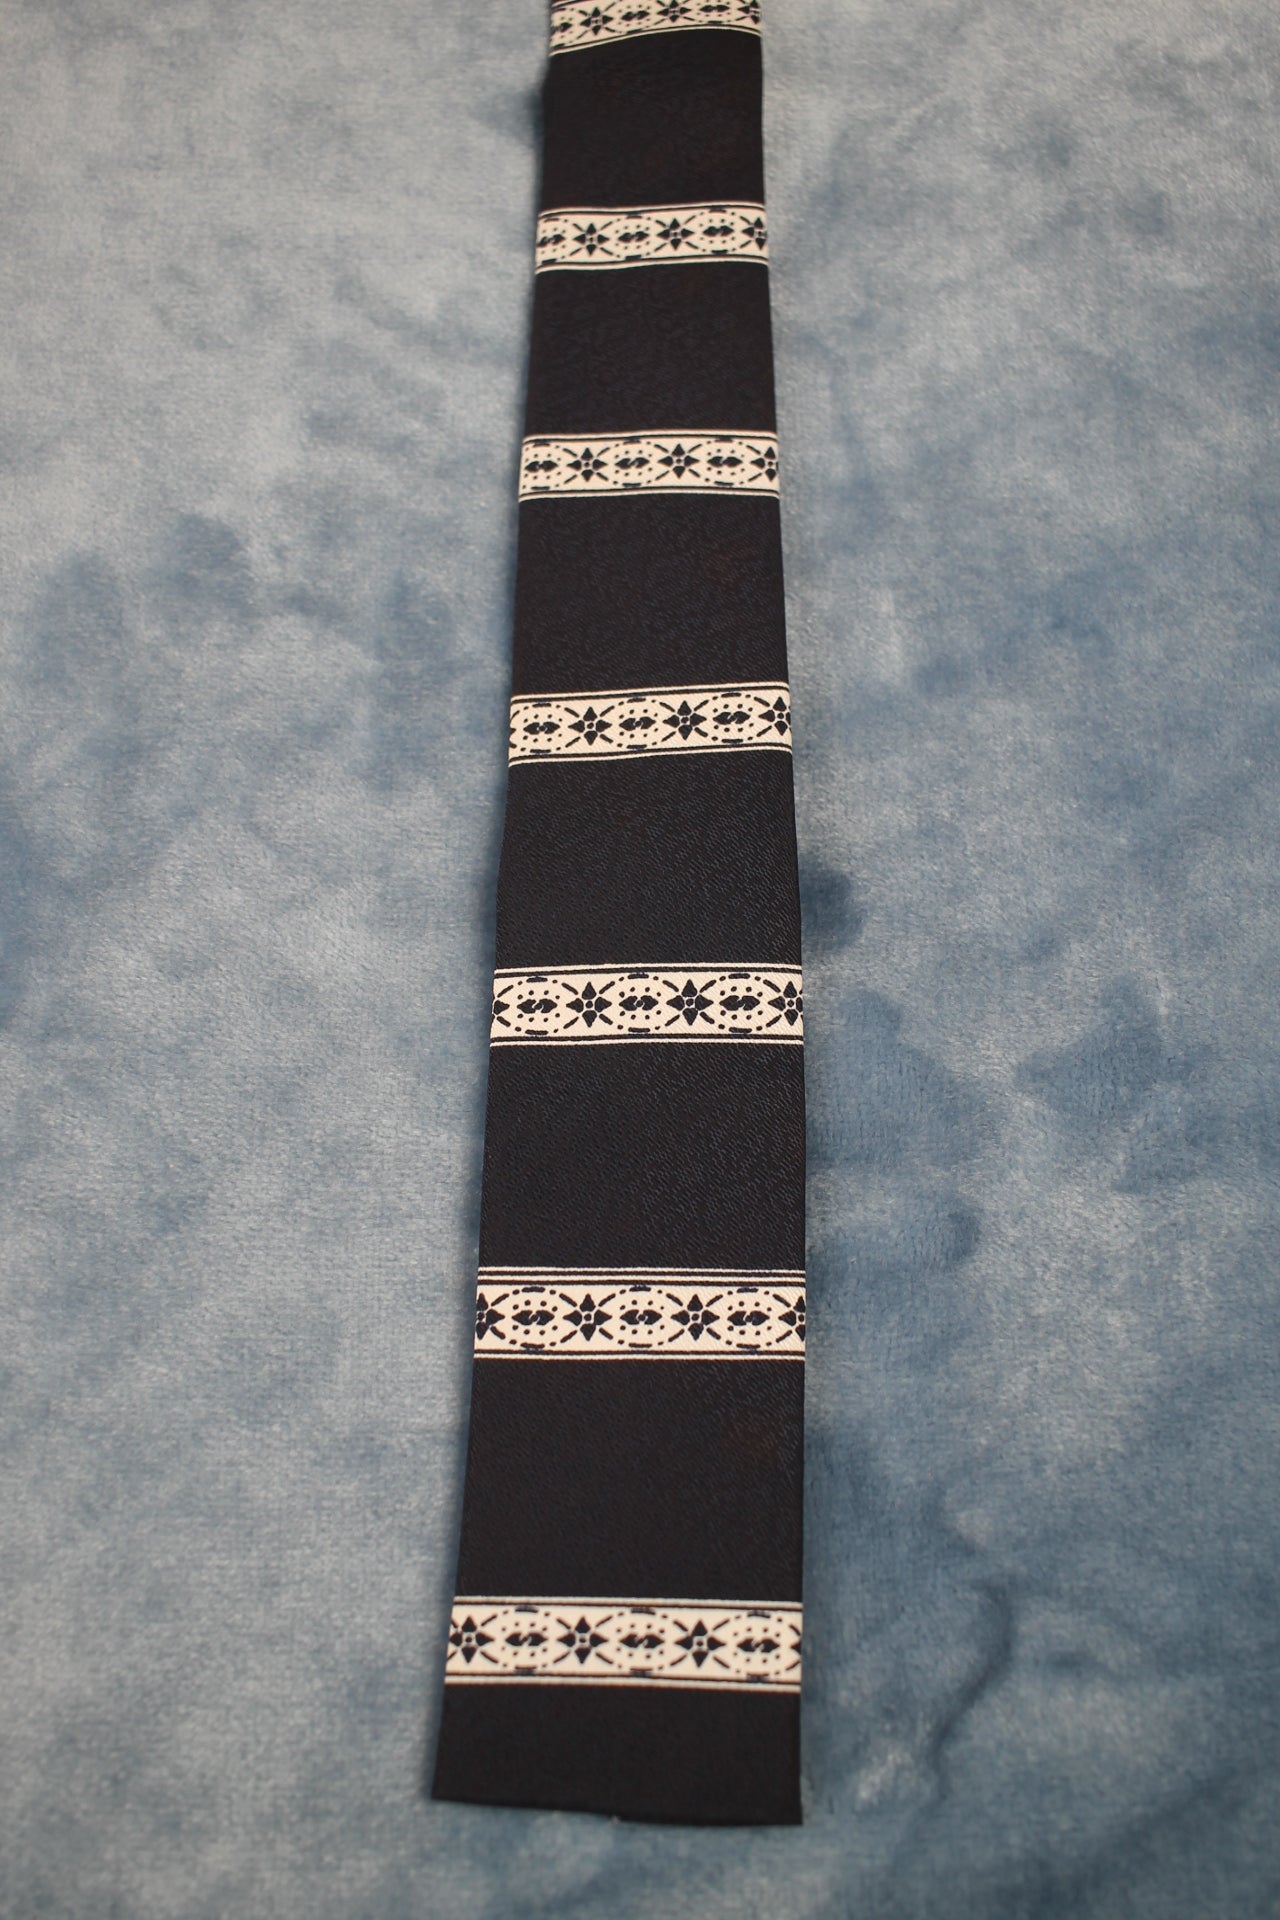 Vintage Lord Harcount Dark Blue White Pattern Square cut Skinny Tie 1940s/50s